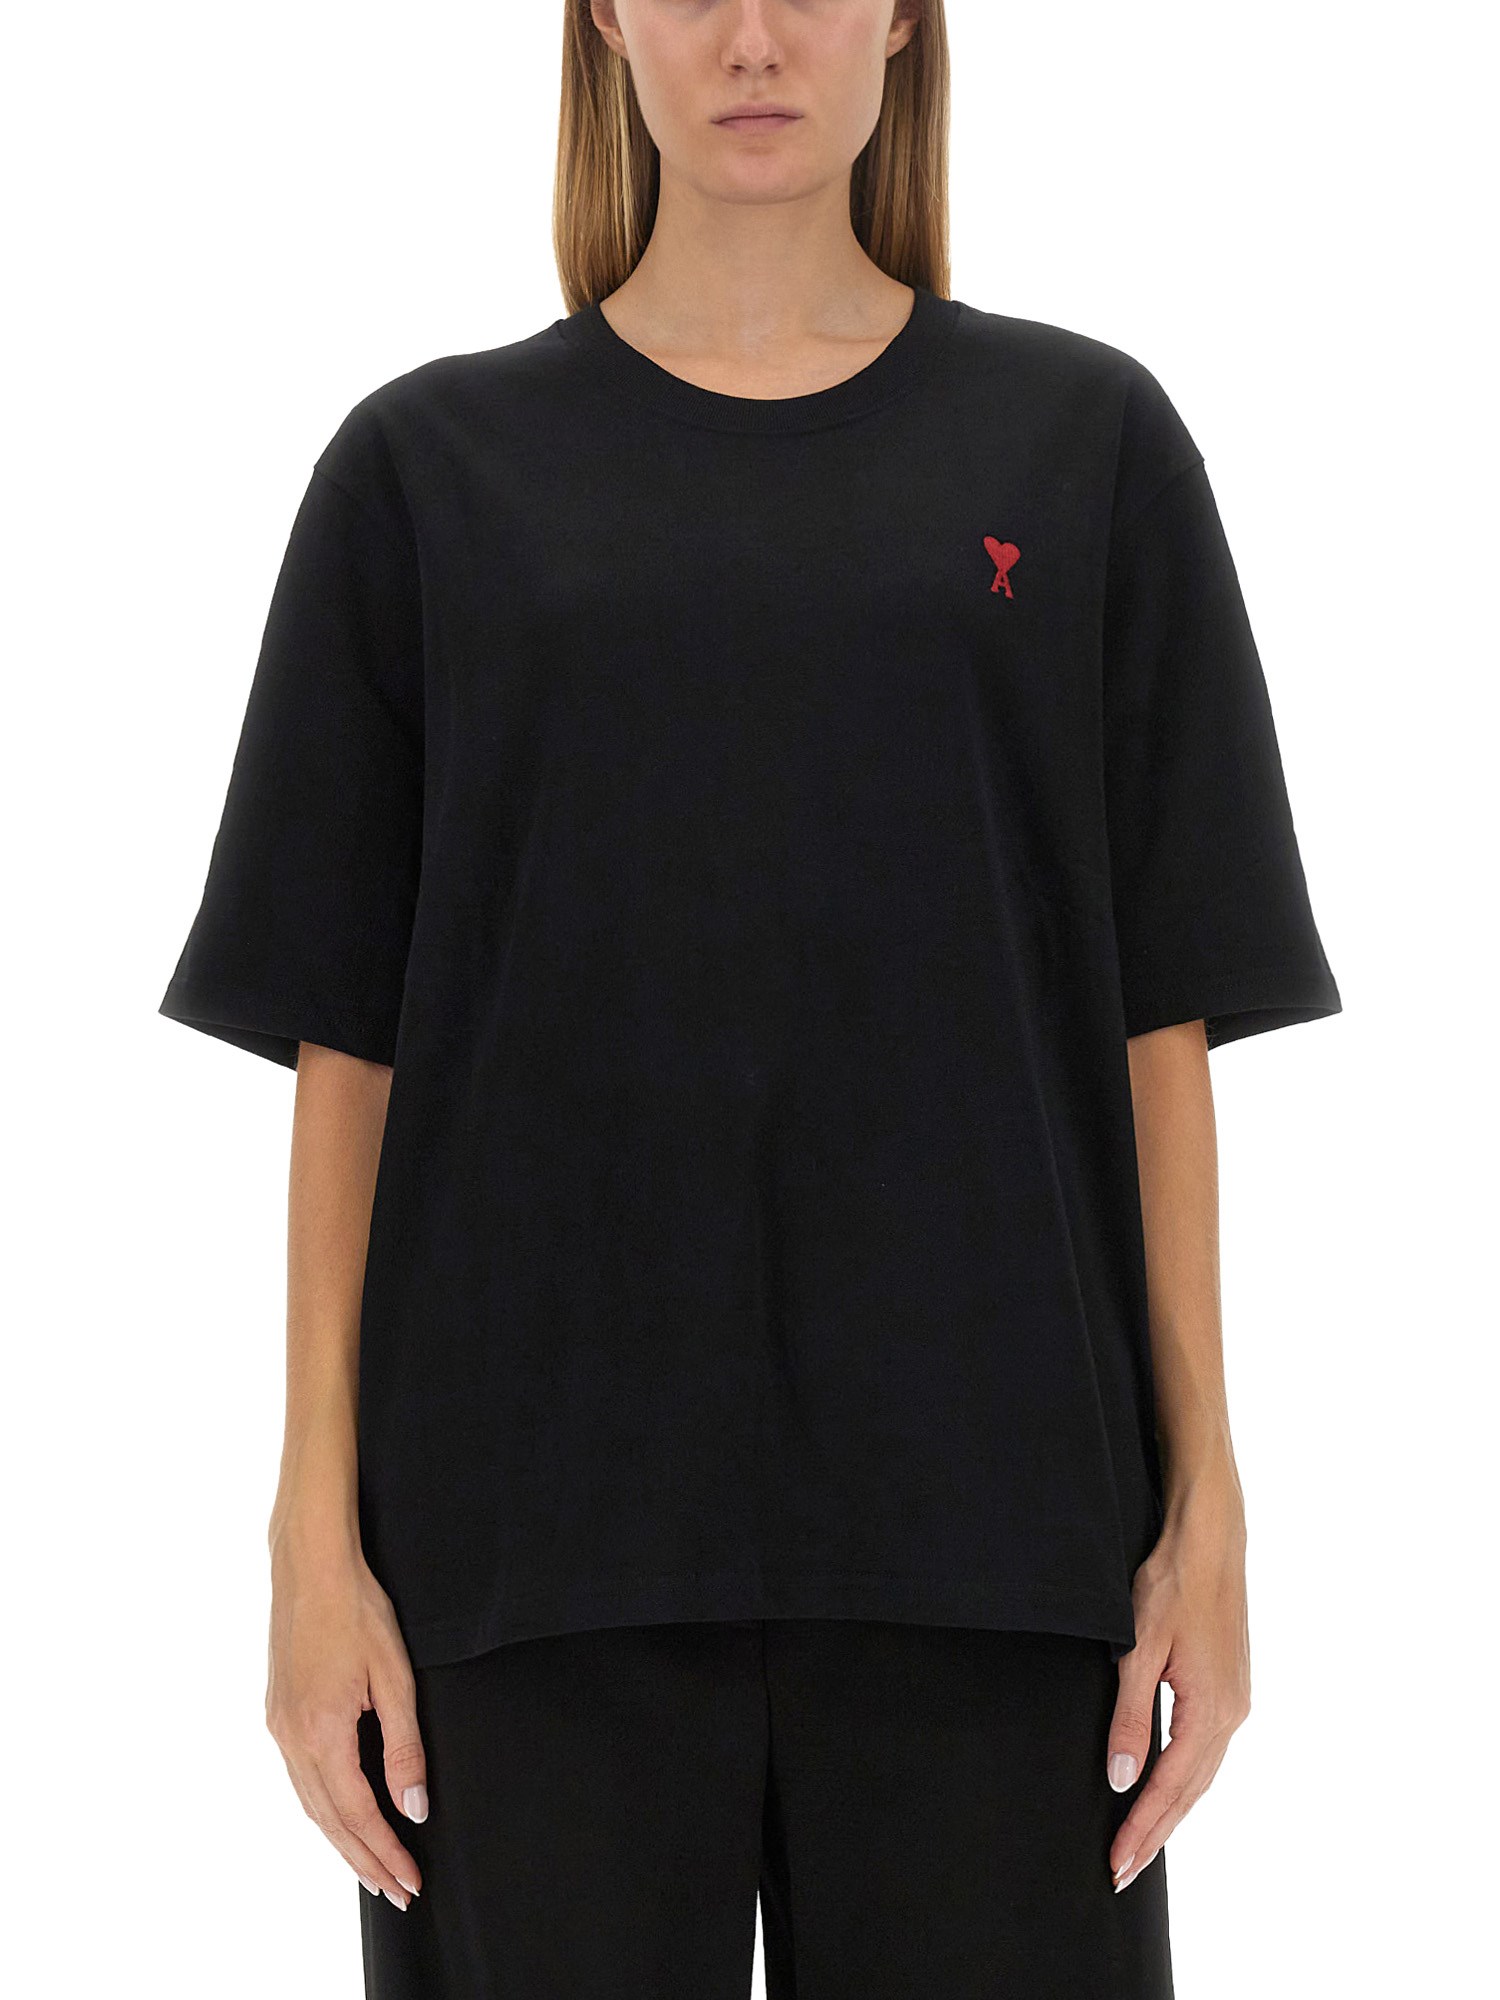 AMI ALEXANDRE MATTIUSSI T-SHIRT WITH LOGO EMBROIDERY